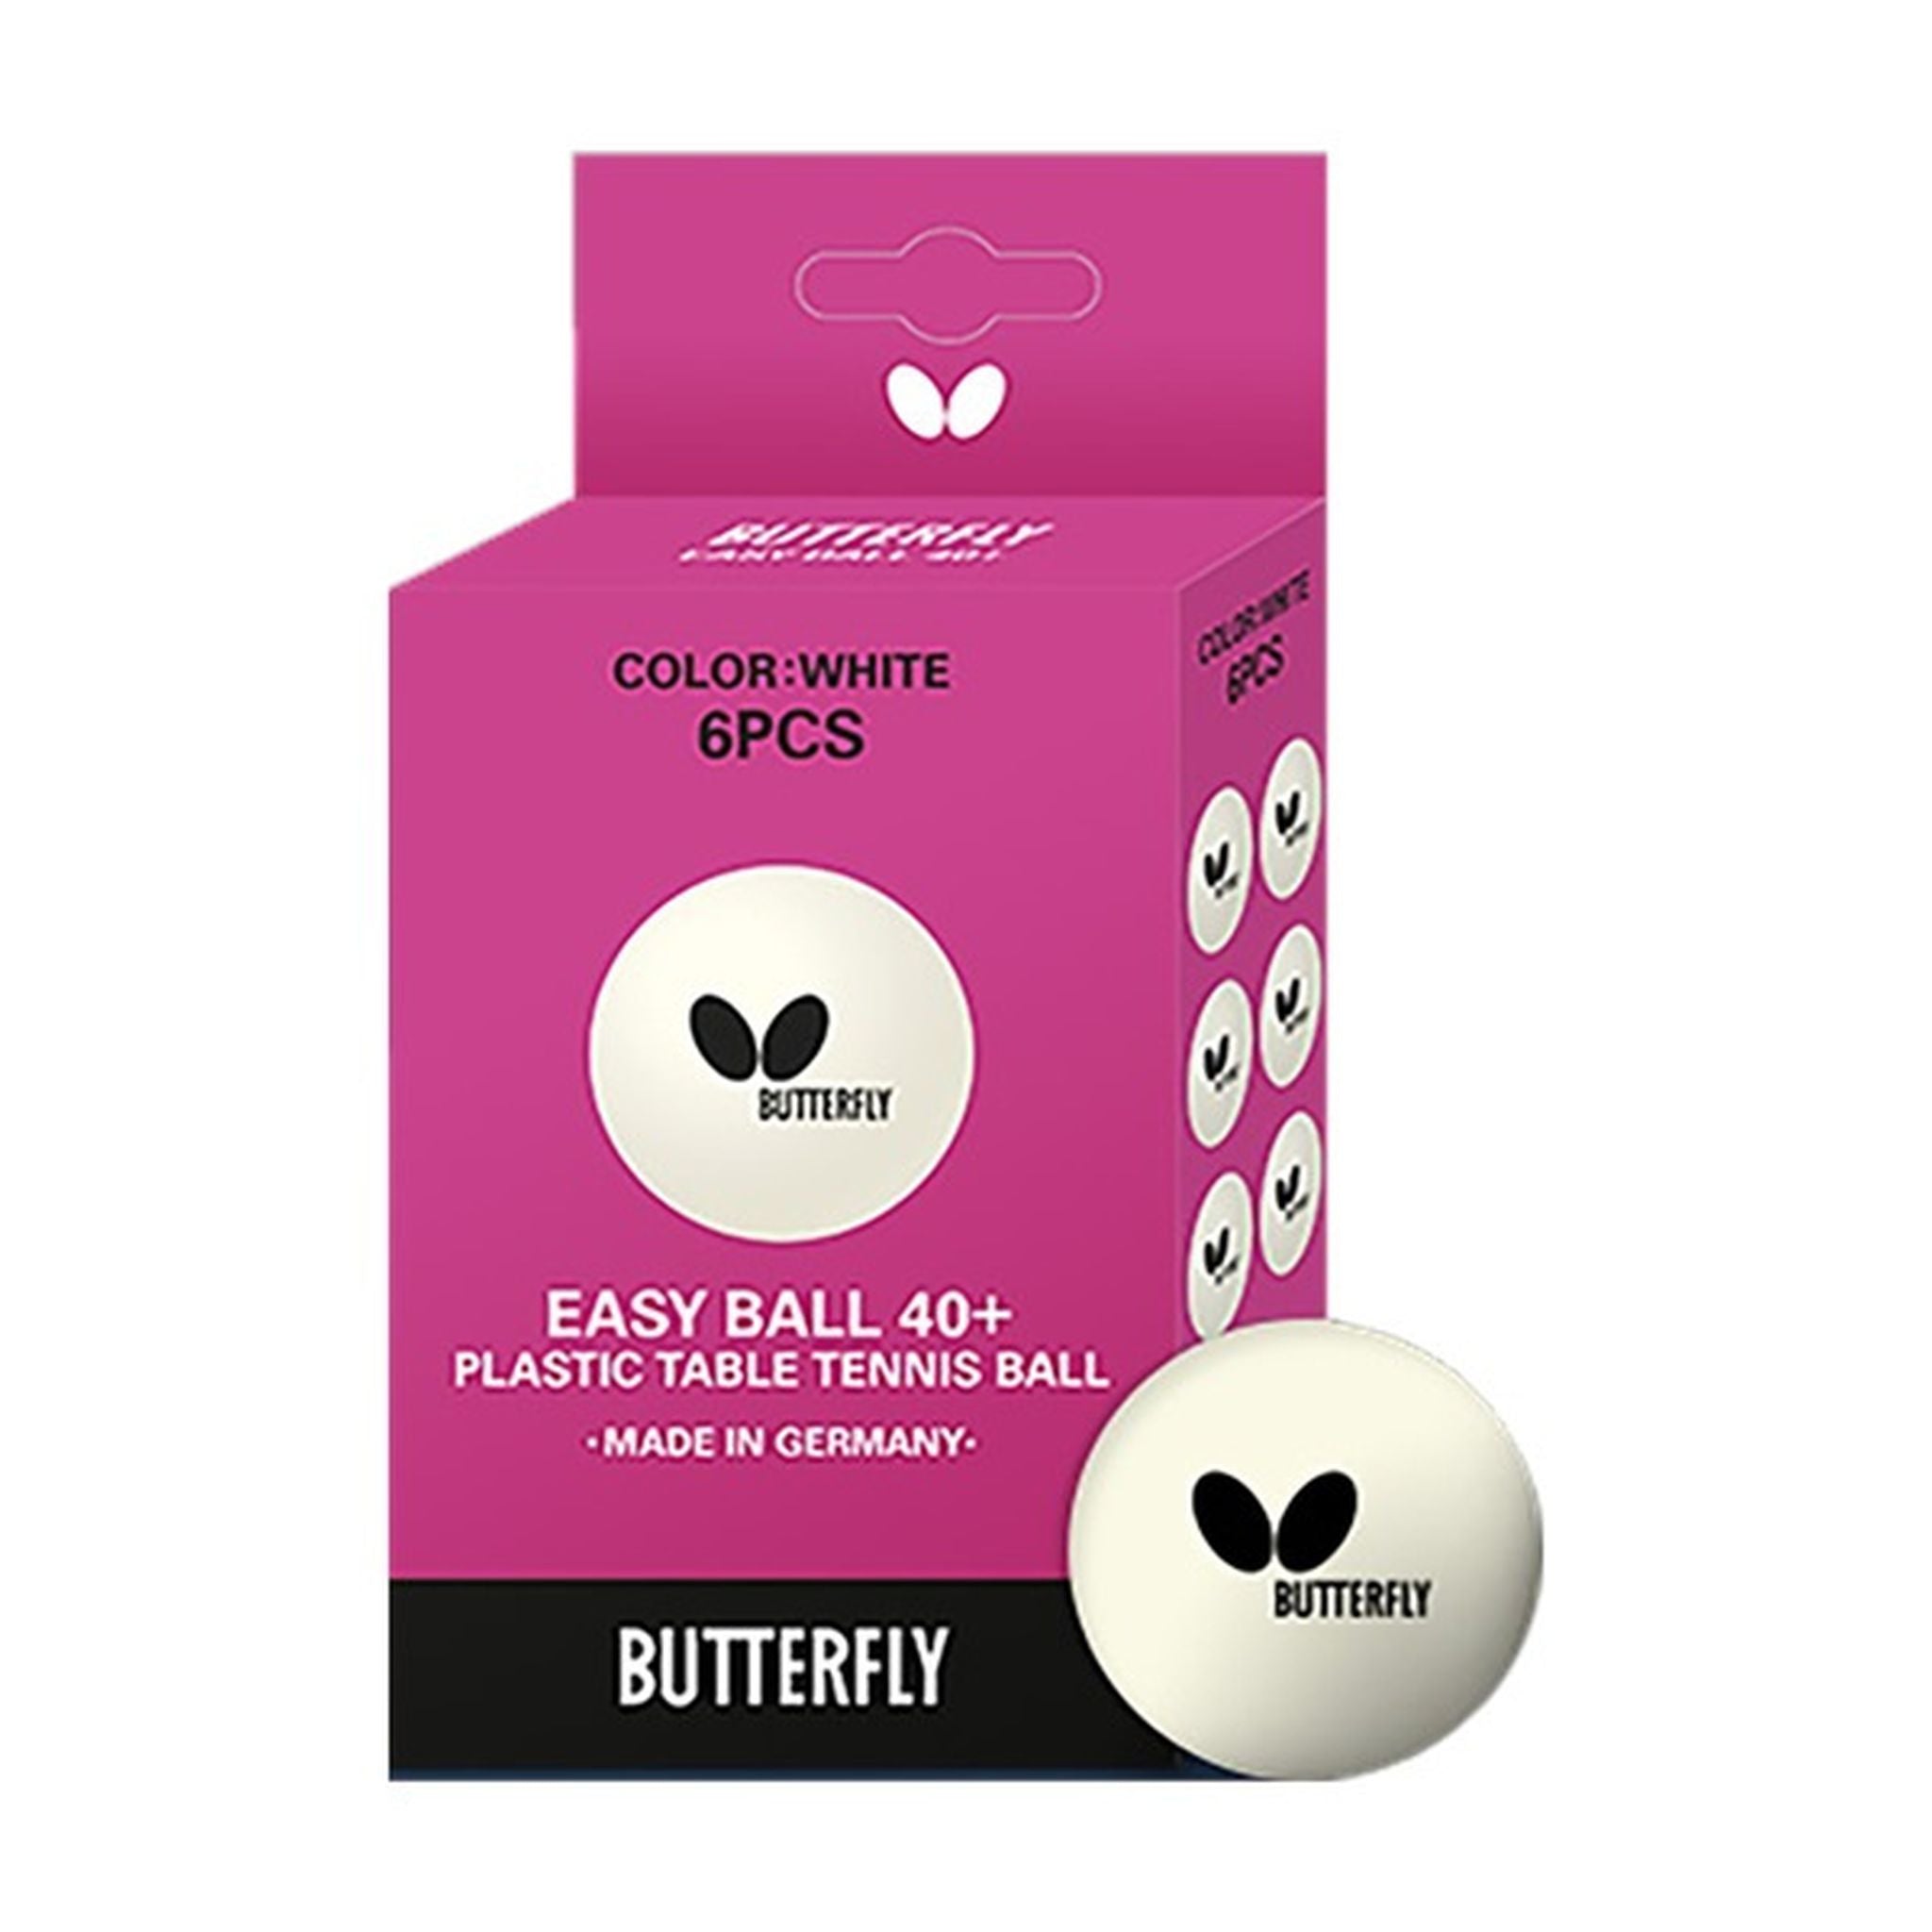 Butterfly Easy 40+ Table Tennis Balls - 6 Pack